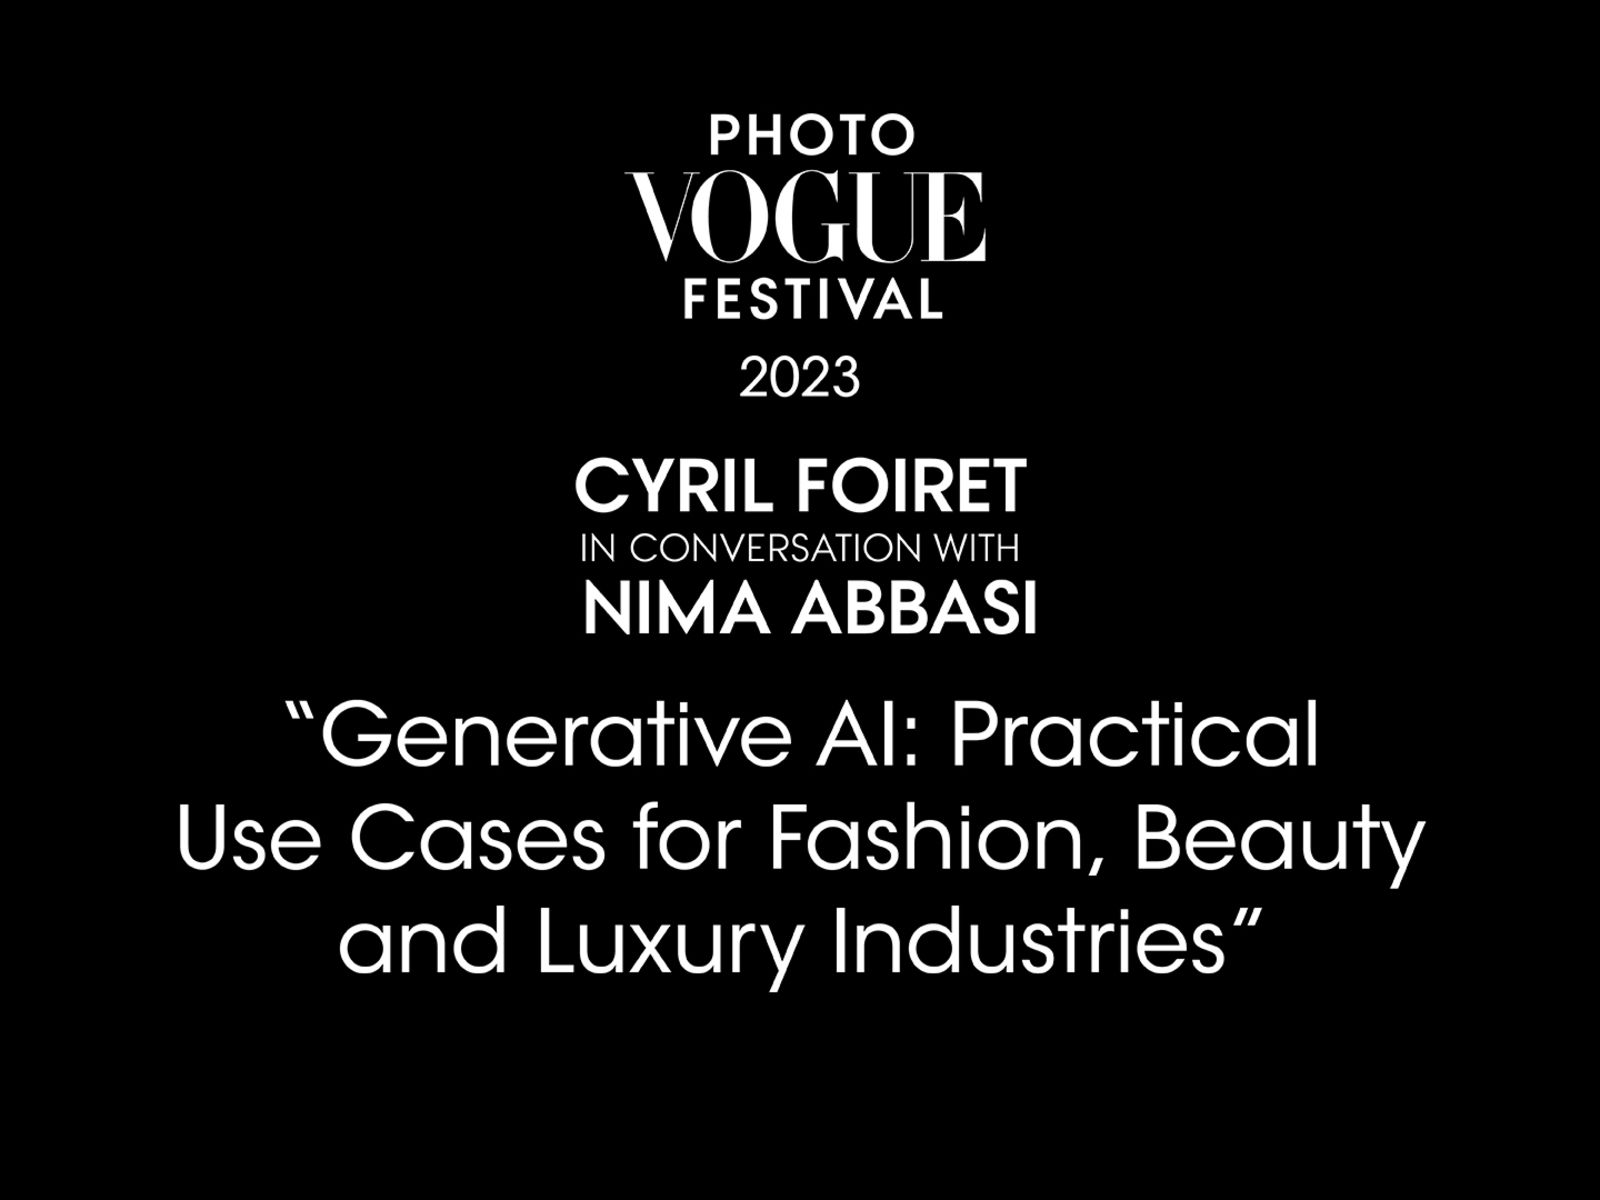 Generative AI: Practical Use Cases for Fashion, Beauty and Luxury Industries | PhotoVogue Festival 2023: What Makes Us Human? Image in the Age of A.I.